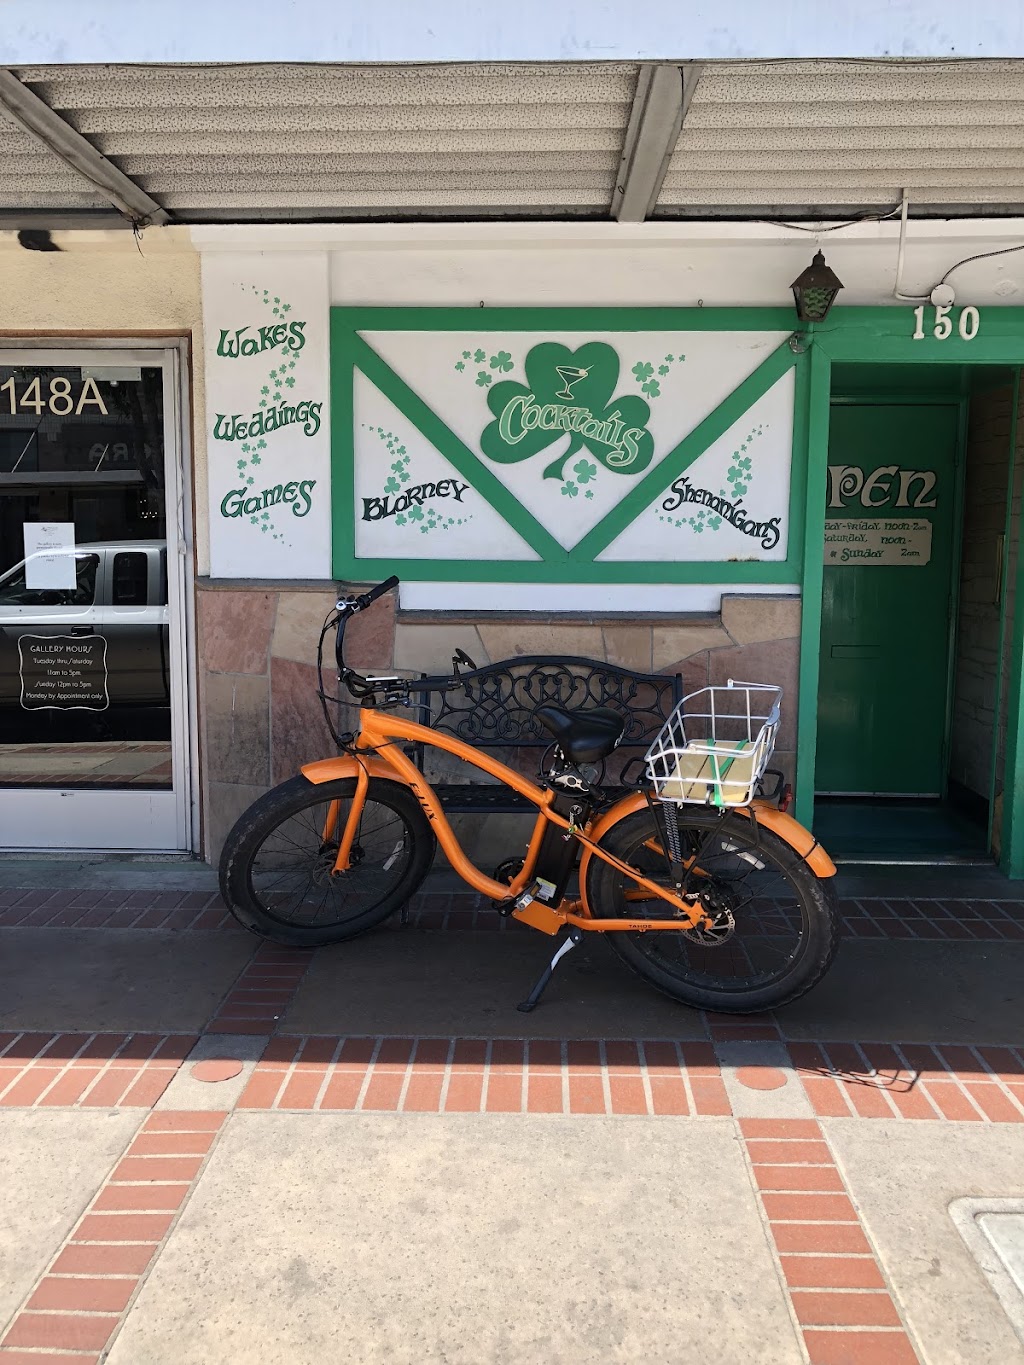 San Clemente Electric Bikes and Rentals | 2345 S El Camino Real, San Clemente, CA 92672 | Phone: (949) 444-6421